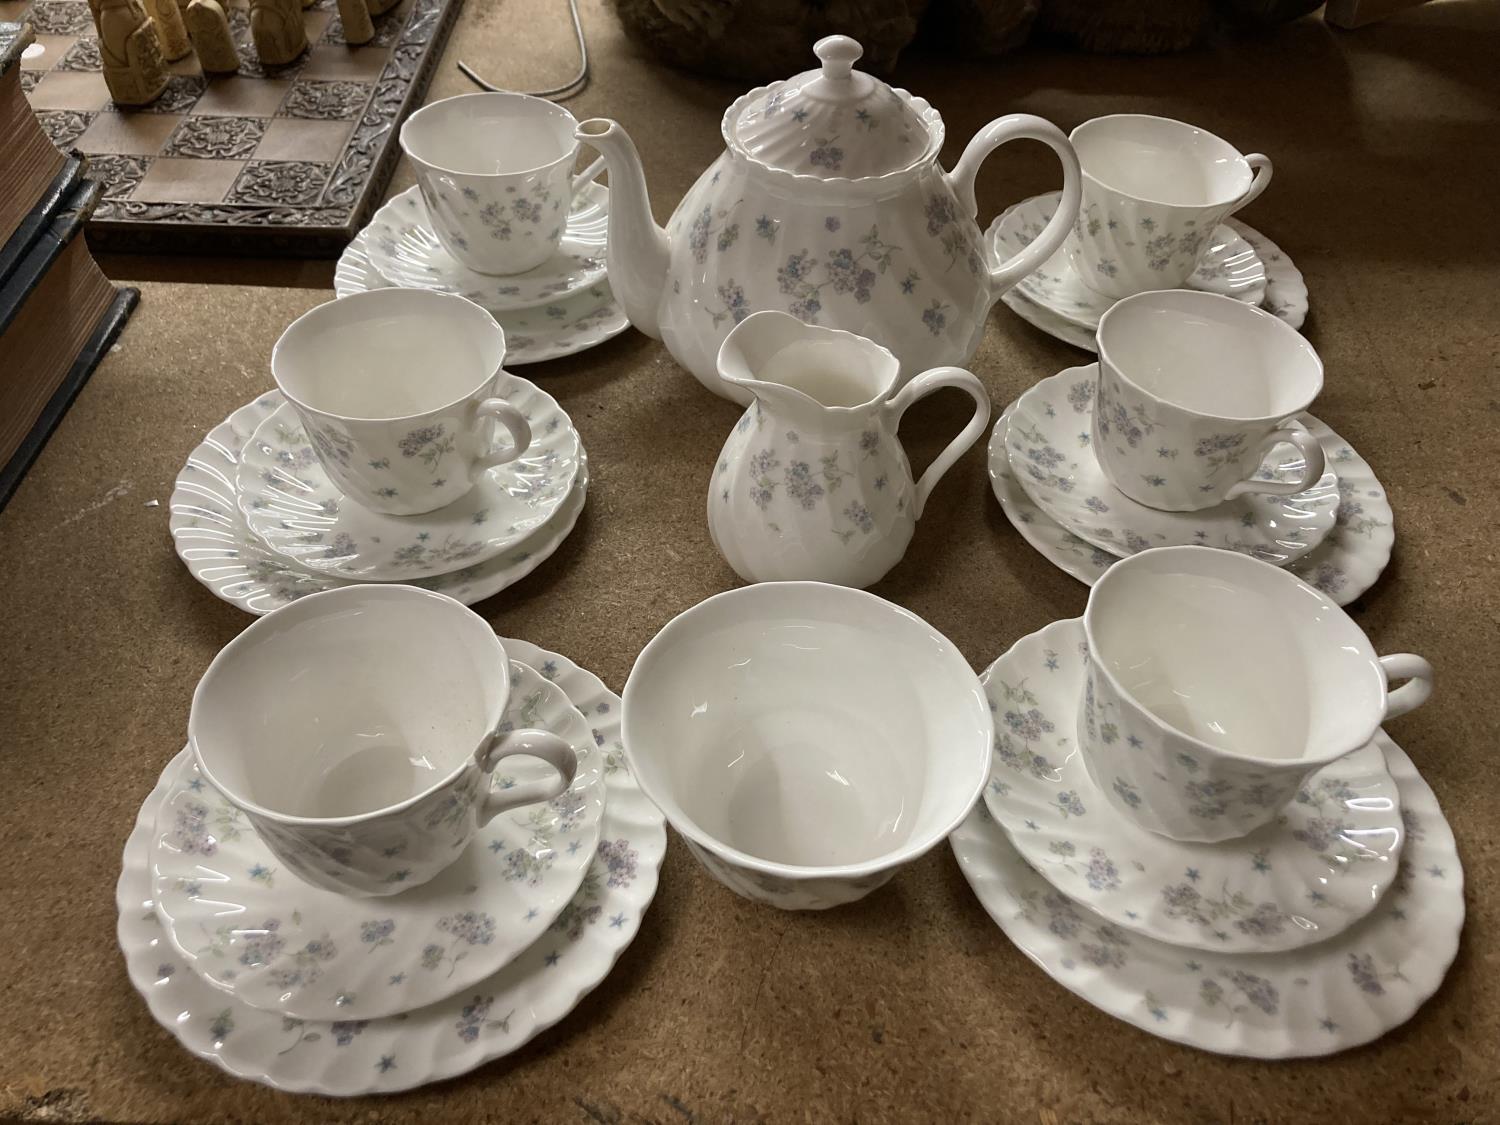 A QUANTITY OF WEDGWOOD 'APRIL FLOWERS' CHINA TO INCLUDE CUPS, SAUCERS,S PLATES, TEAPOT, CREAM JUG,